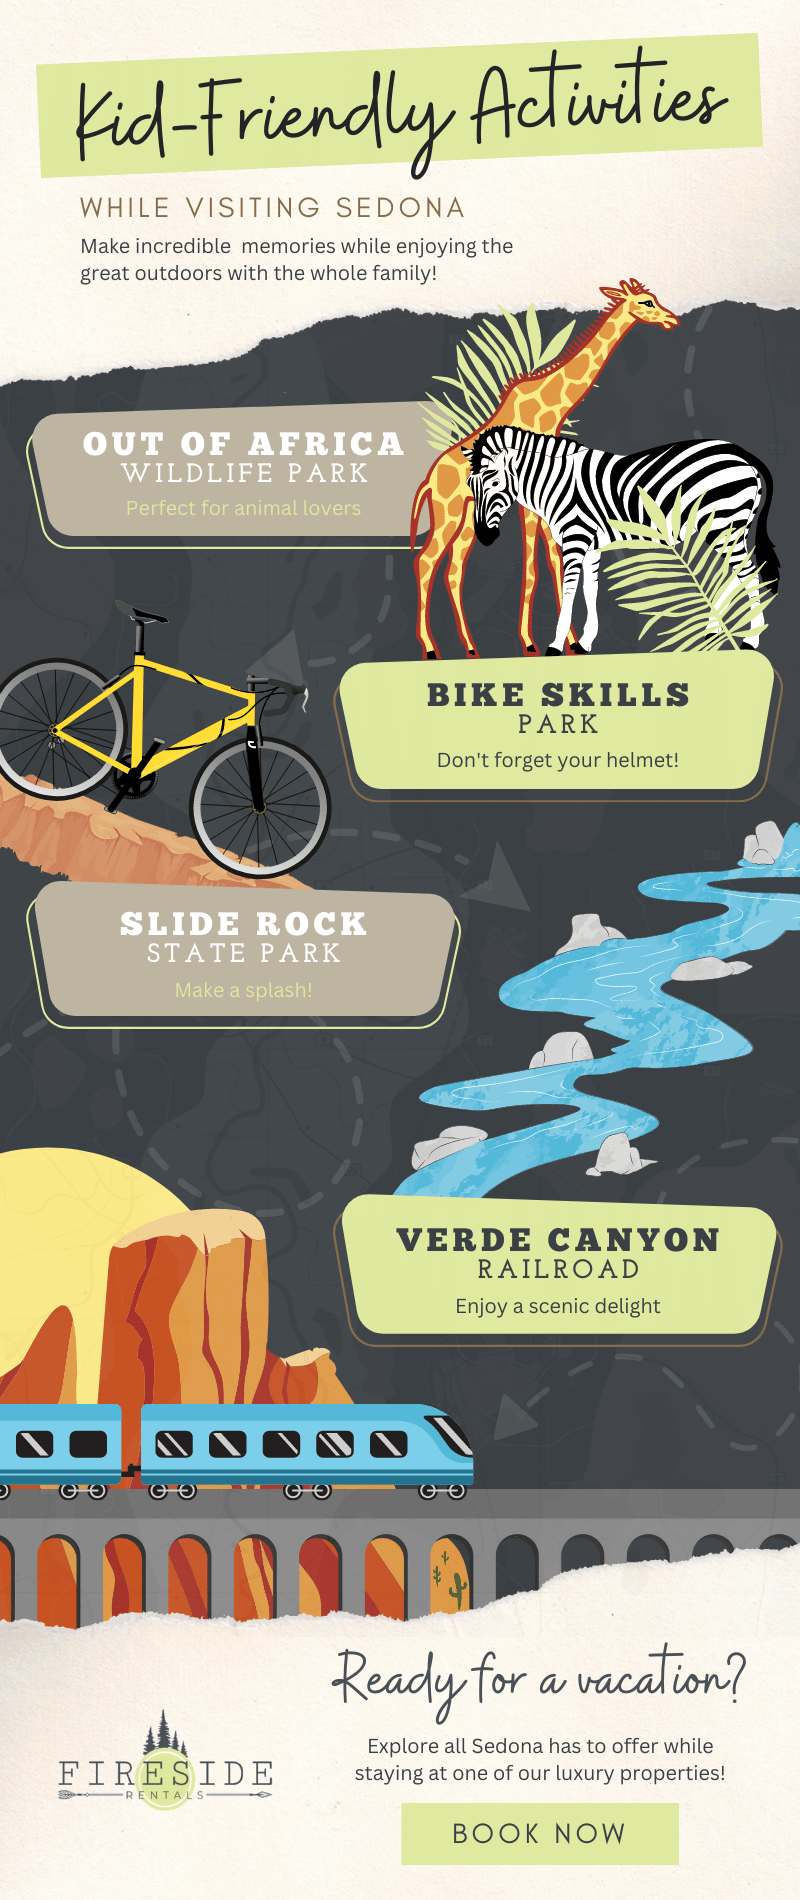 Kid-Friendly Activities While Visiting Sedona Infographic